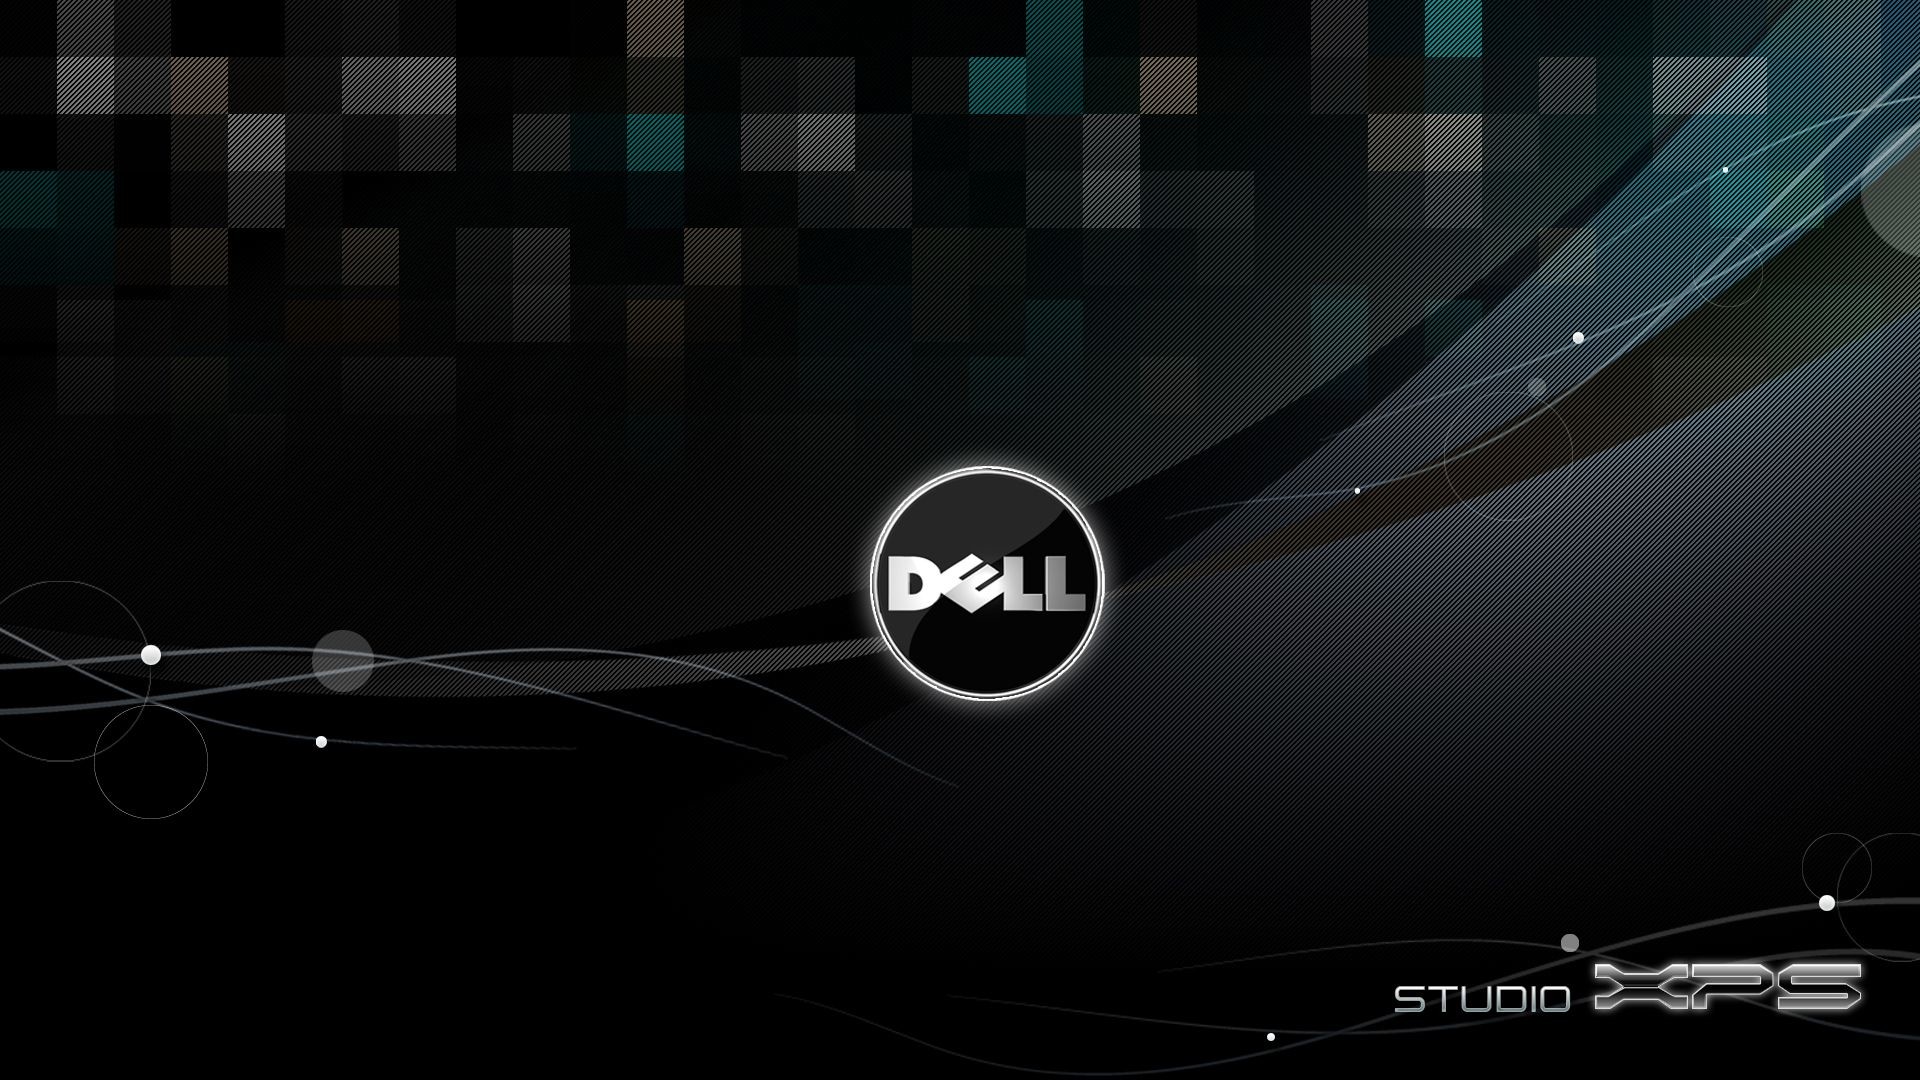 1920x1080  Dell Wallpapers, Fantastic Dell Pictures | 2016 4K Ultra HD .